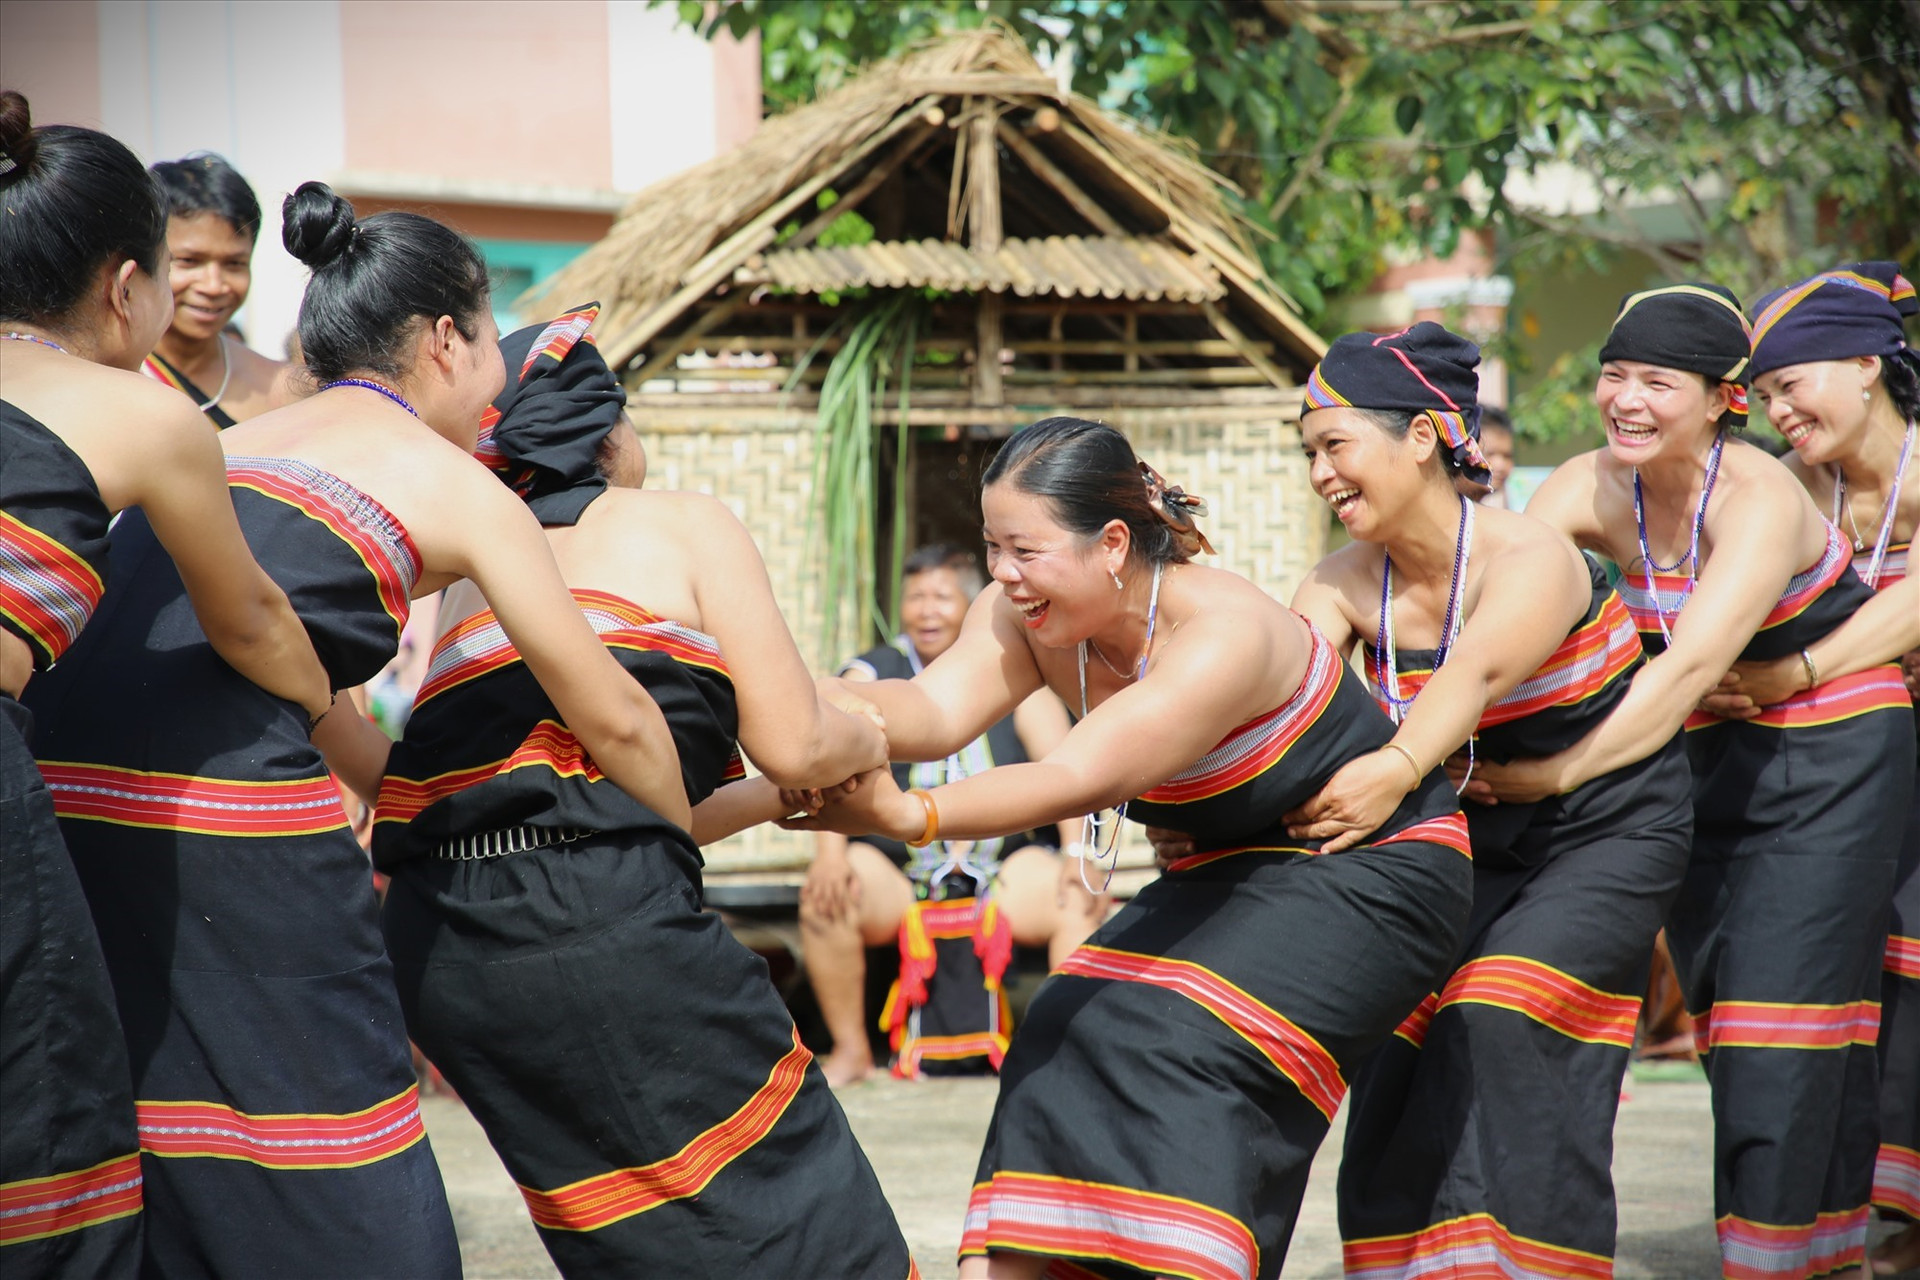 Traditional folk games during the festival